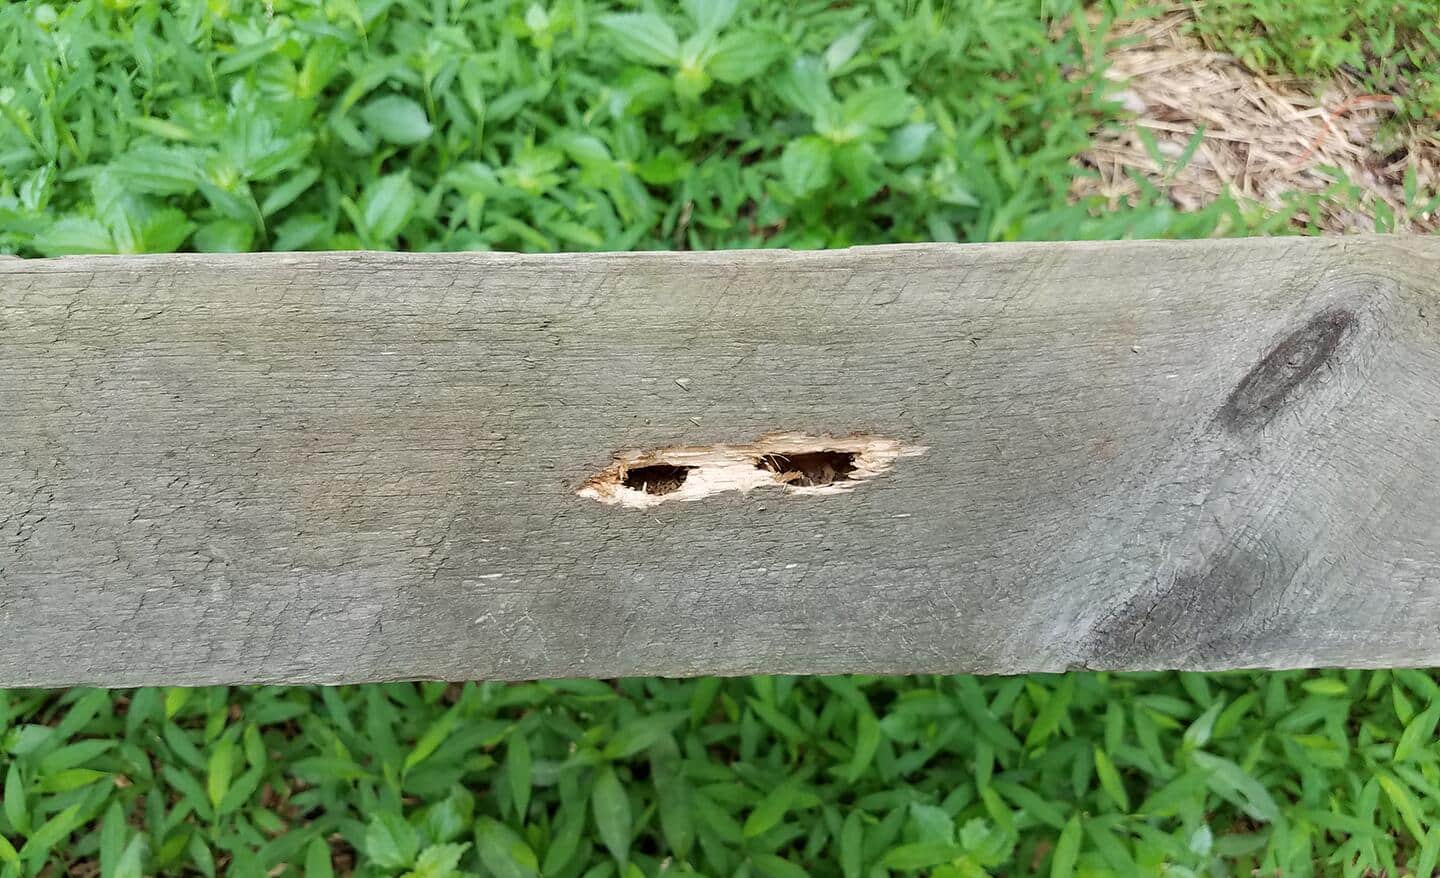 Holes in a wooden plank show signs of carpenter bee infestation.